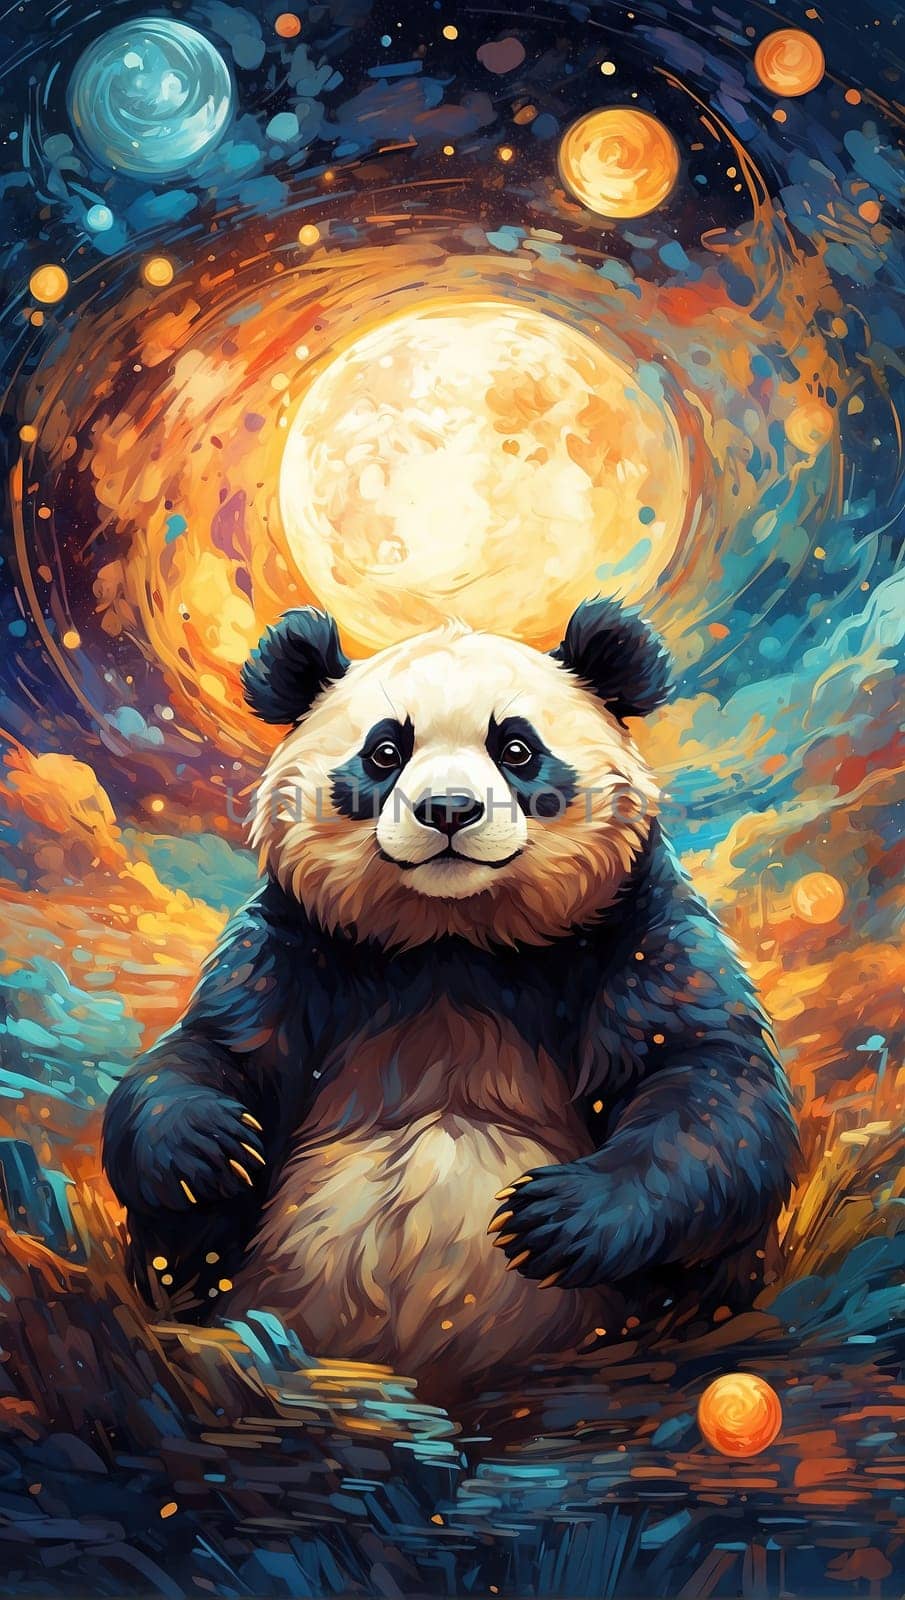 Panda on the background of the moon and stars. Illustration. by Waseem-Creations